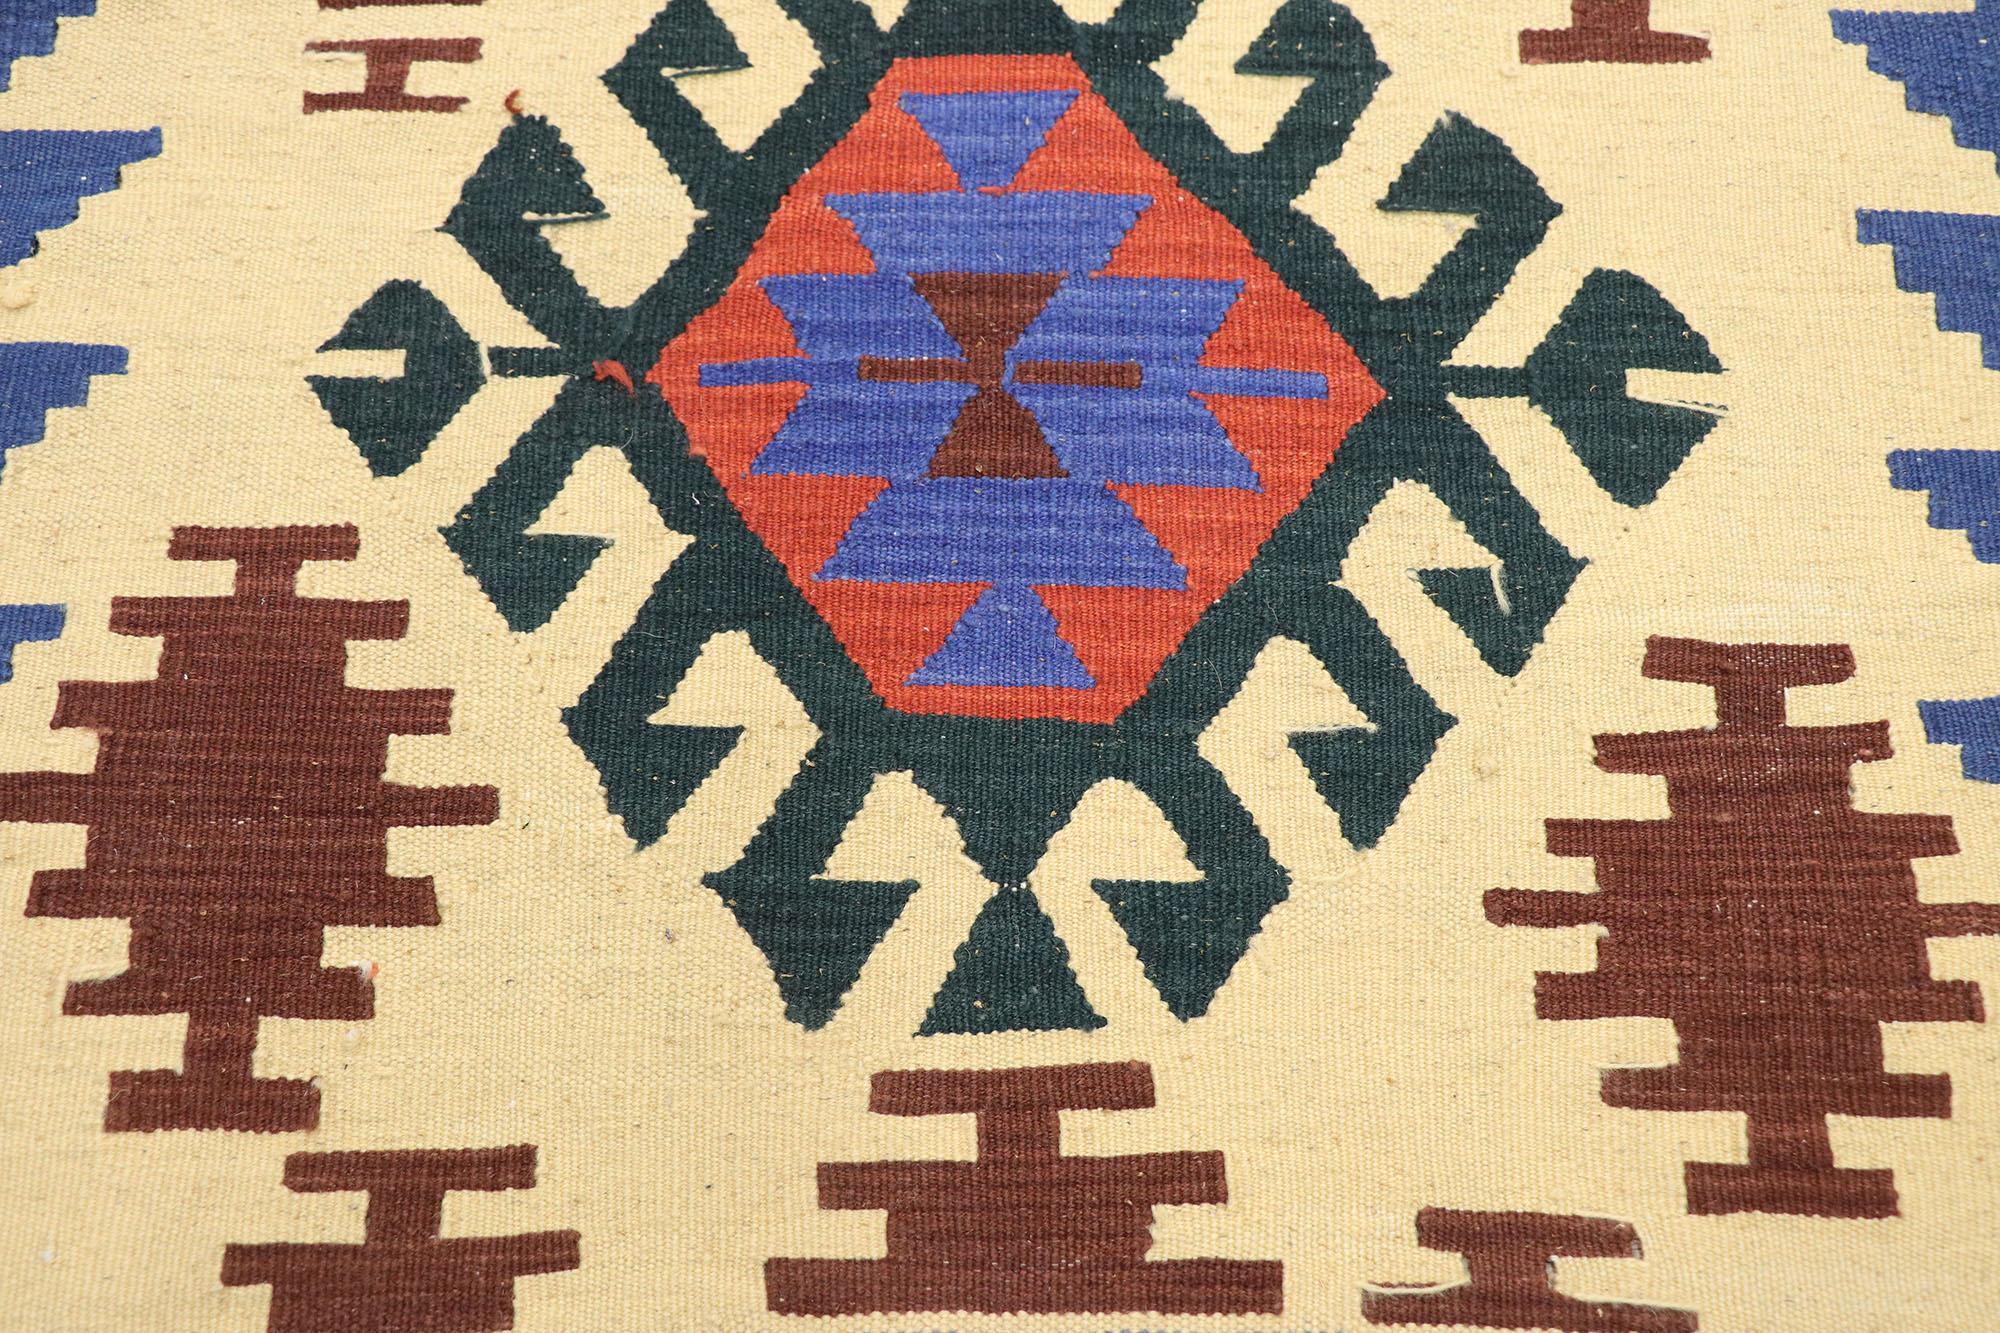 Vintage Persian Shiraz Kilim Rug, Luxury Lodge Meets Modern Southwest Style In Good Condition For Sale In Dallas, TX